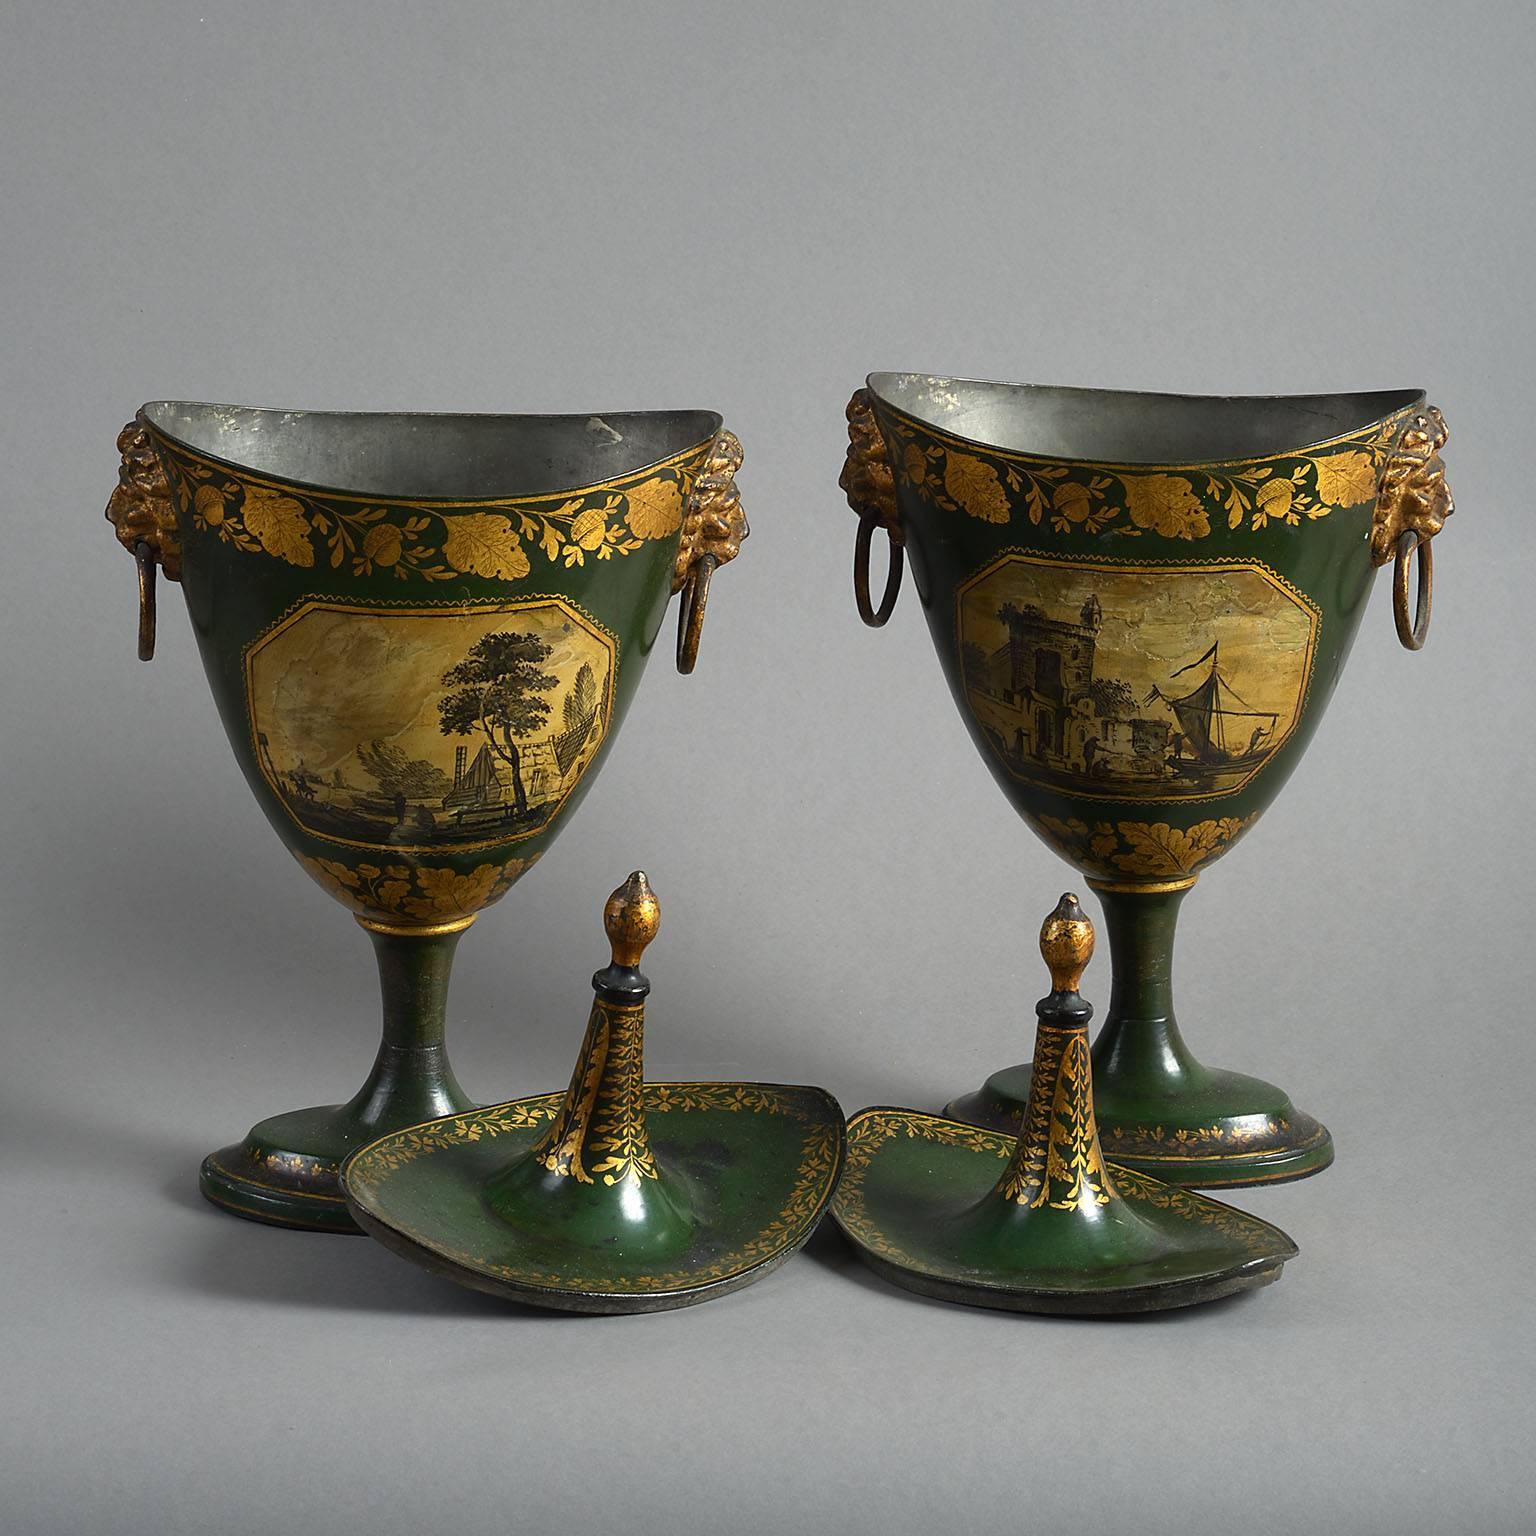 English Pair of Early 19th Century George III Green Toleware Covered Chestnut Urns